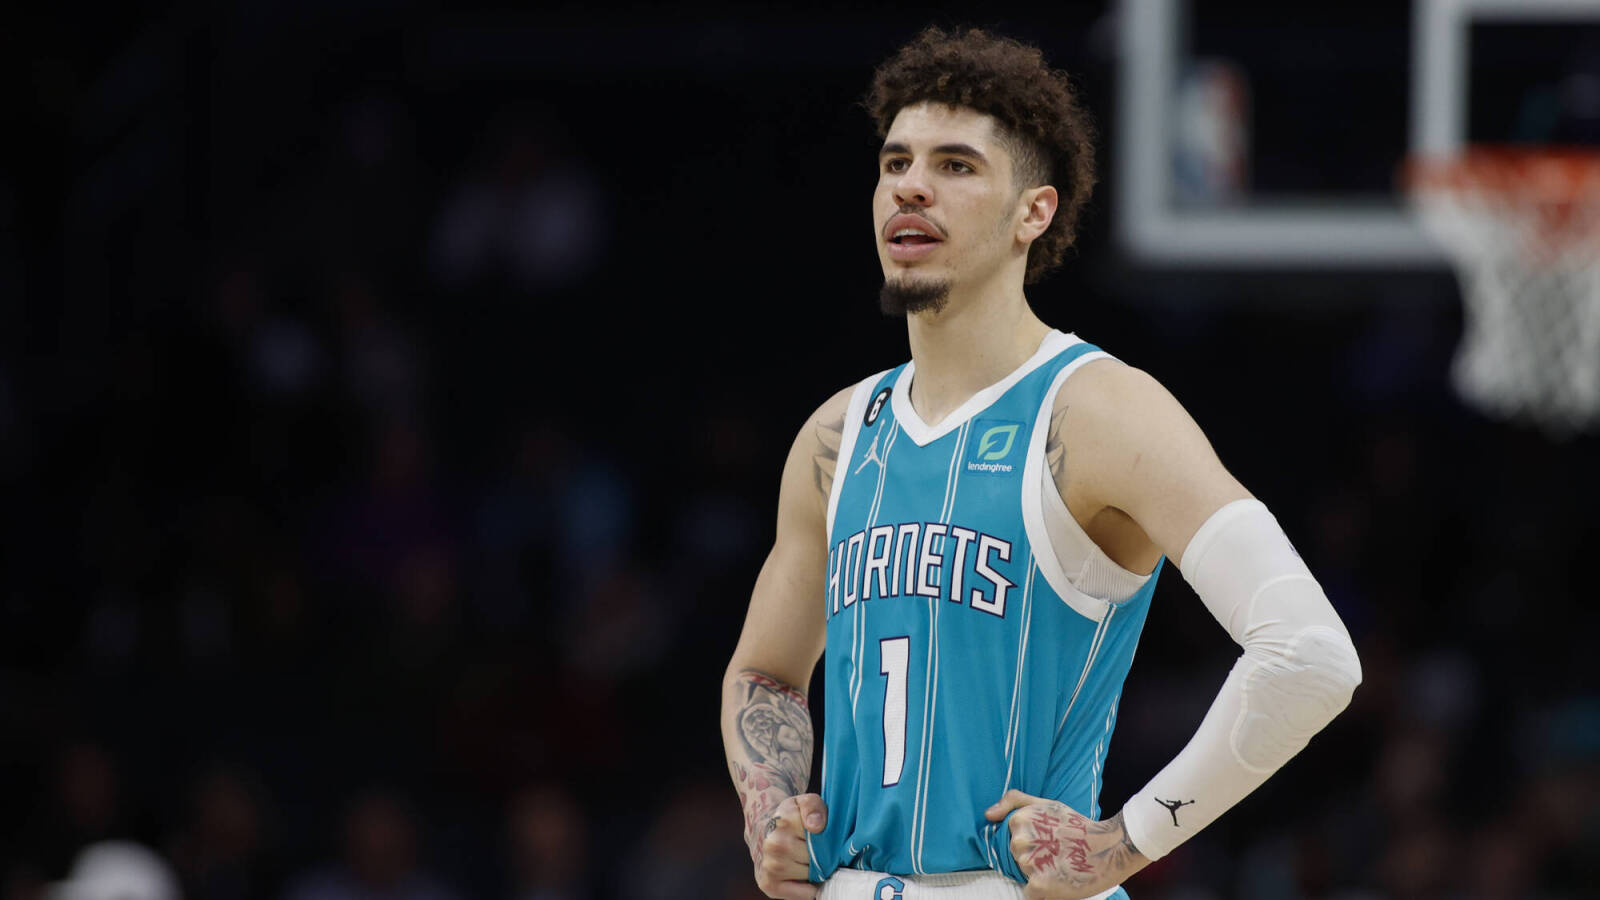 Hornets star 'shooting for MVP' after signing max extension